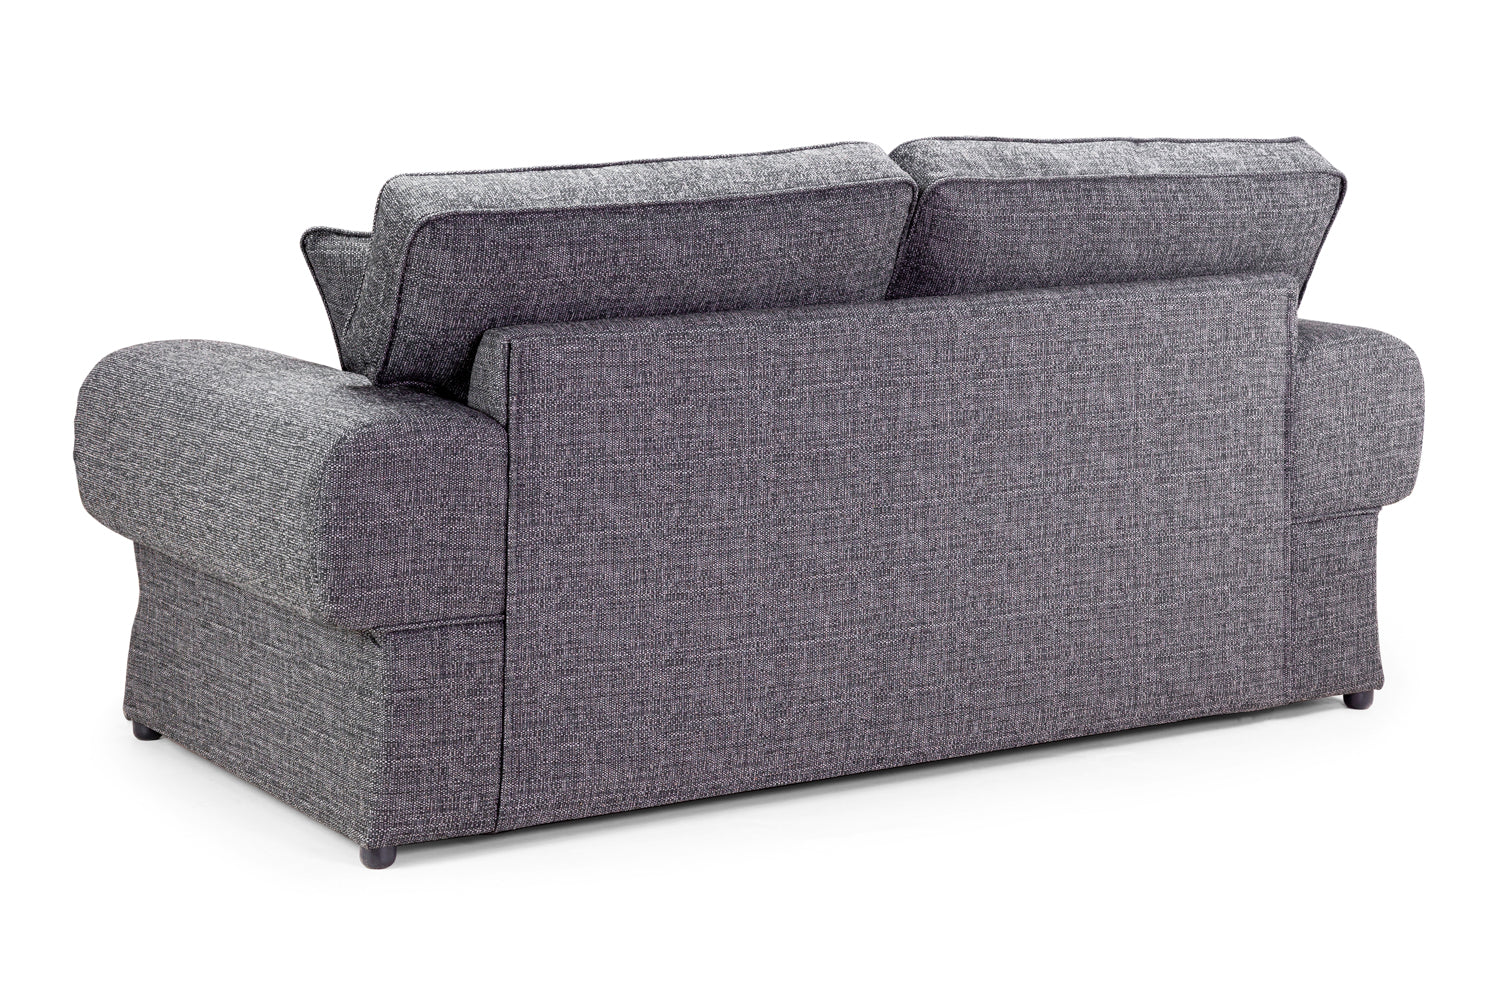 Wilcot Sofa Bed Grey 3 Seater